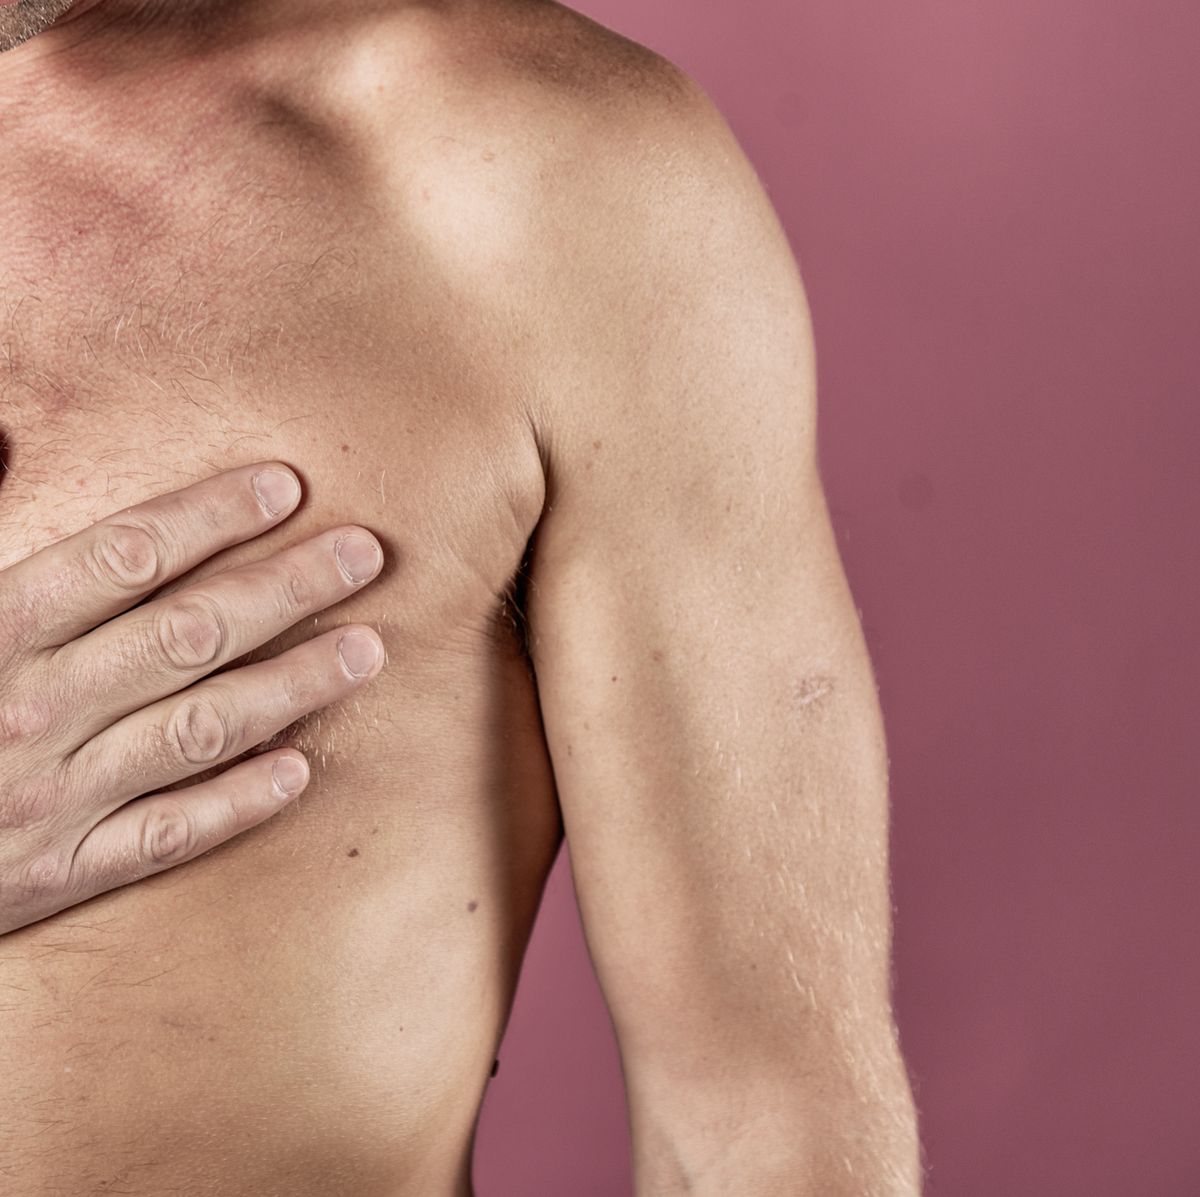 7 Reasons Why Your Nipples Are Itchy and What You Can Do About It